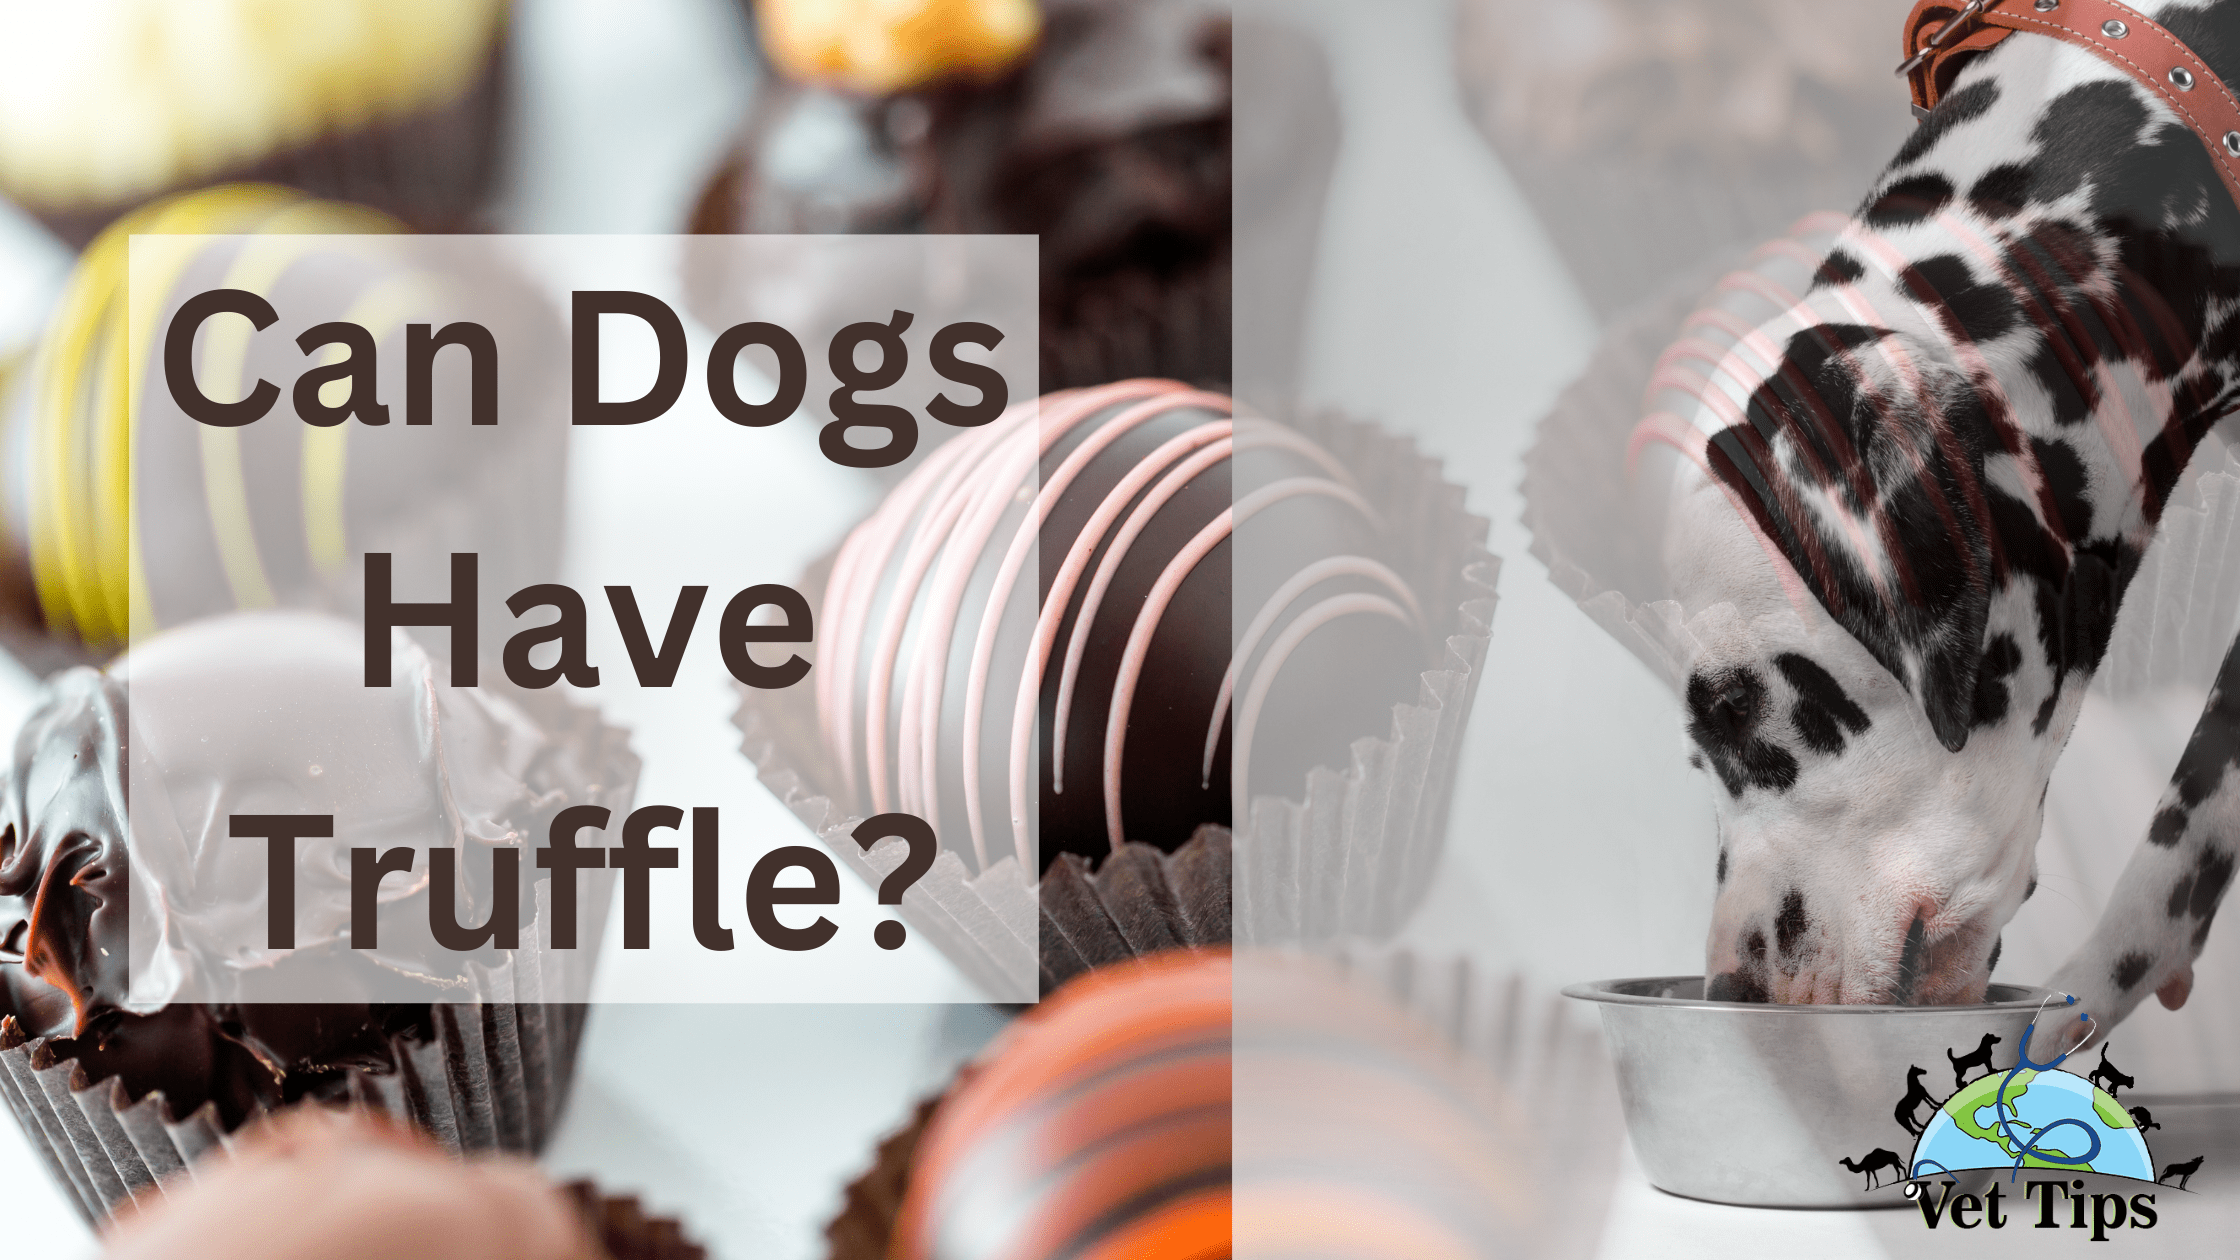 Can Dogs Have Truffle?